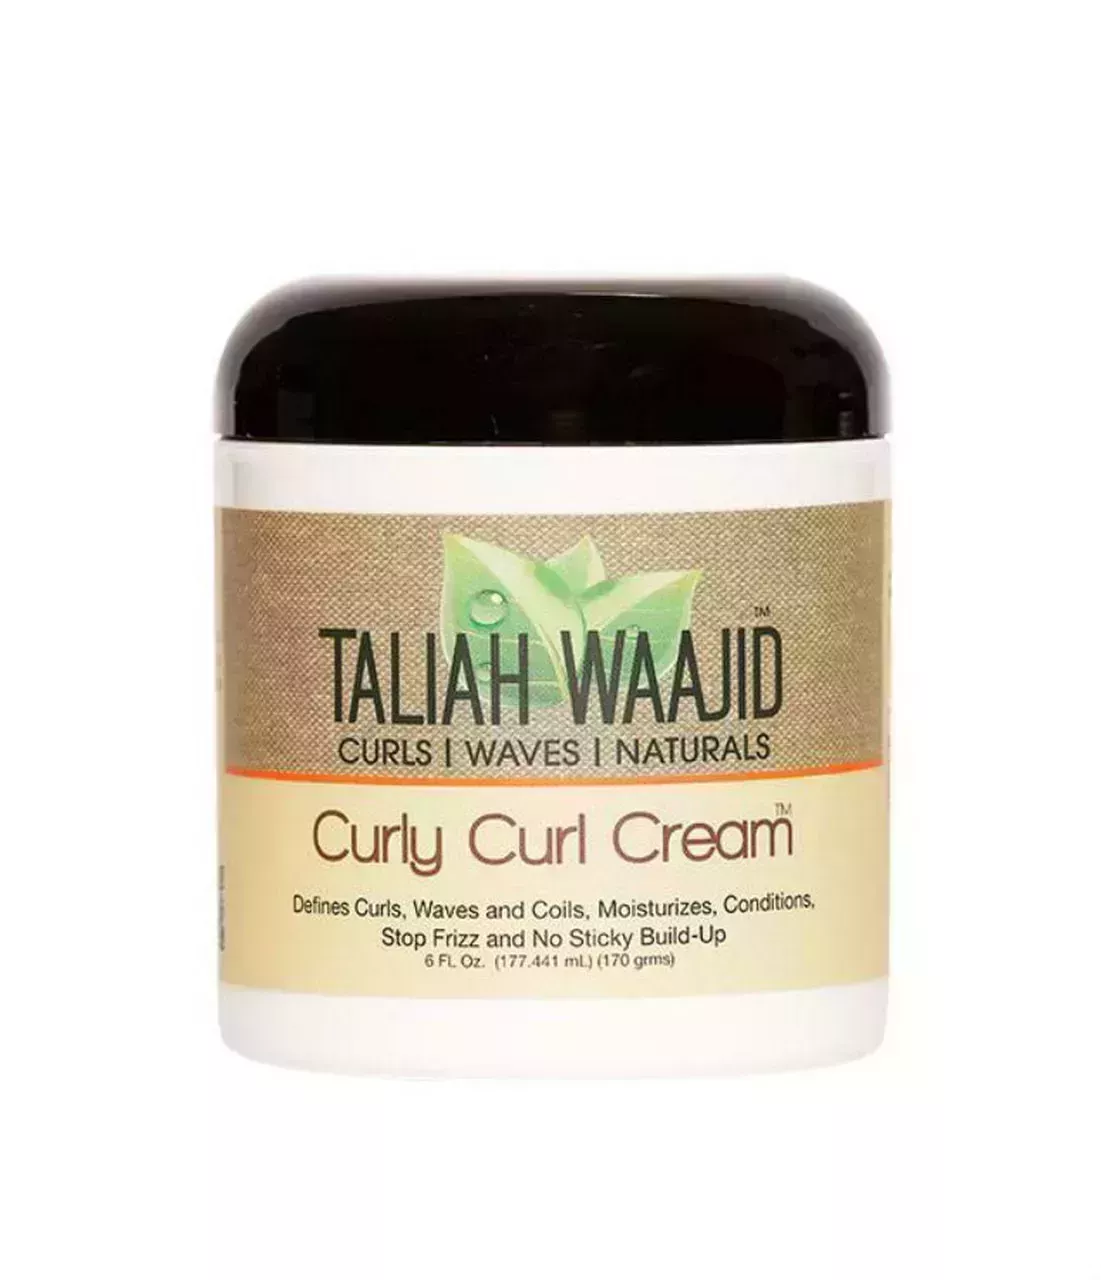 Taliah Waajid Curls, Waves, & Naturals Curly Curl Cream on white background